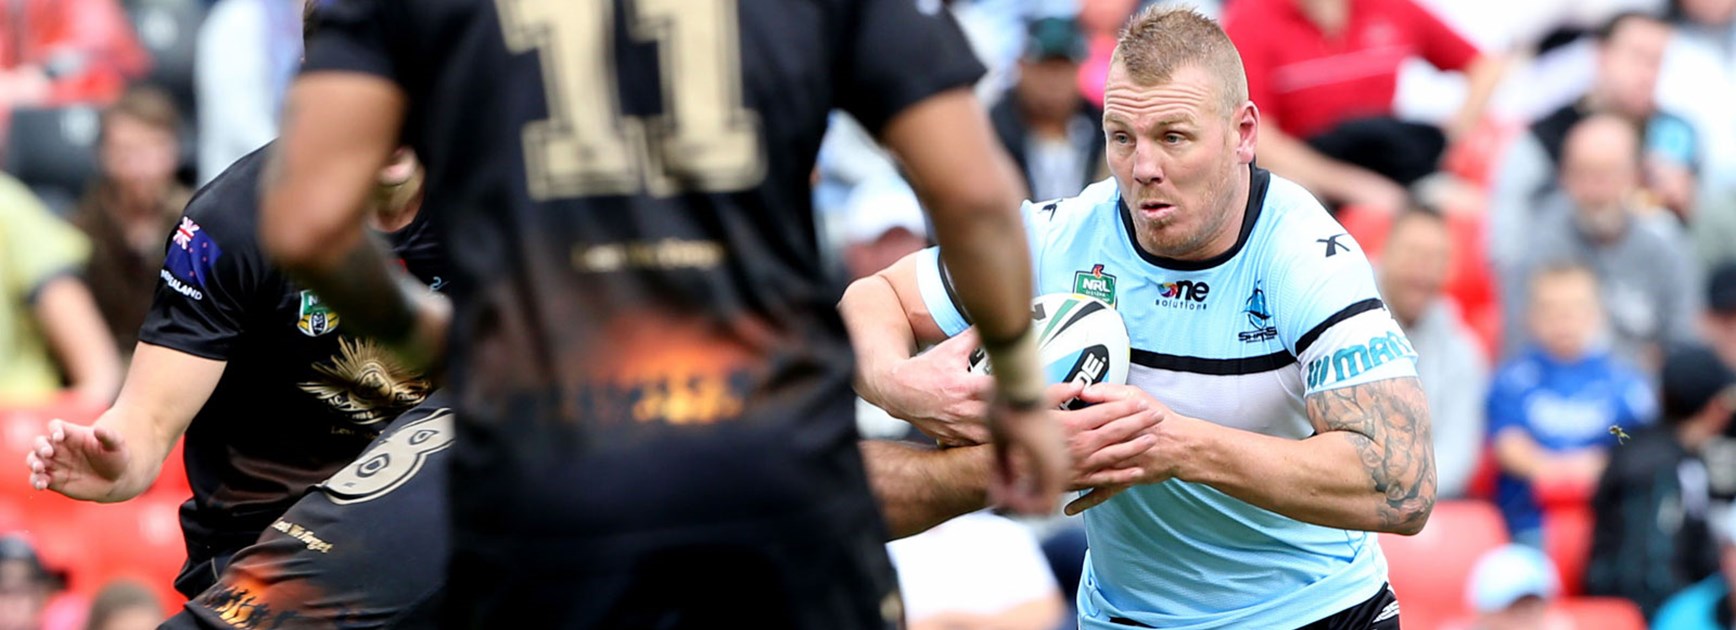 Despite struggling with injury in Round 8, Luke Lewis says he's fit to represent Australia.